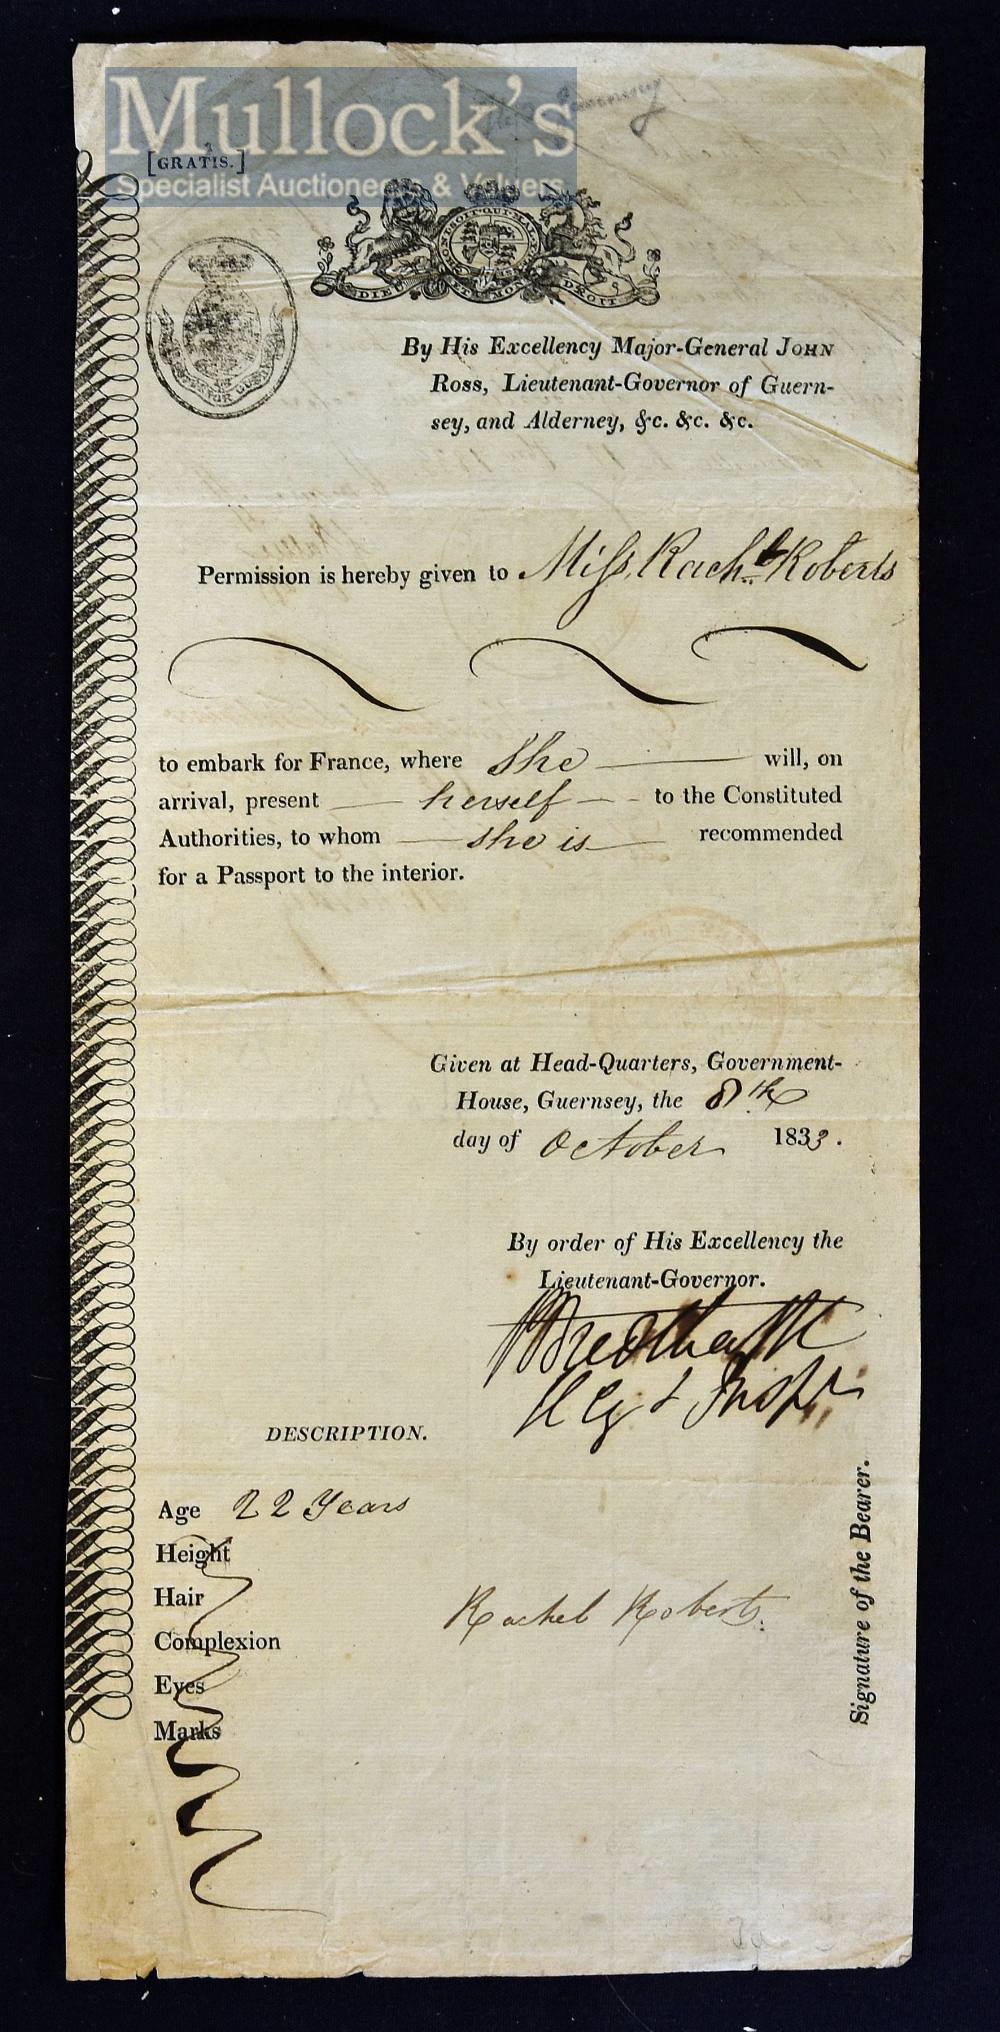 Island of Guernsey Early Passport 1833 - Issued by Major General John Ross Lieutenant-Governor of